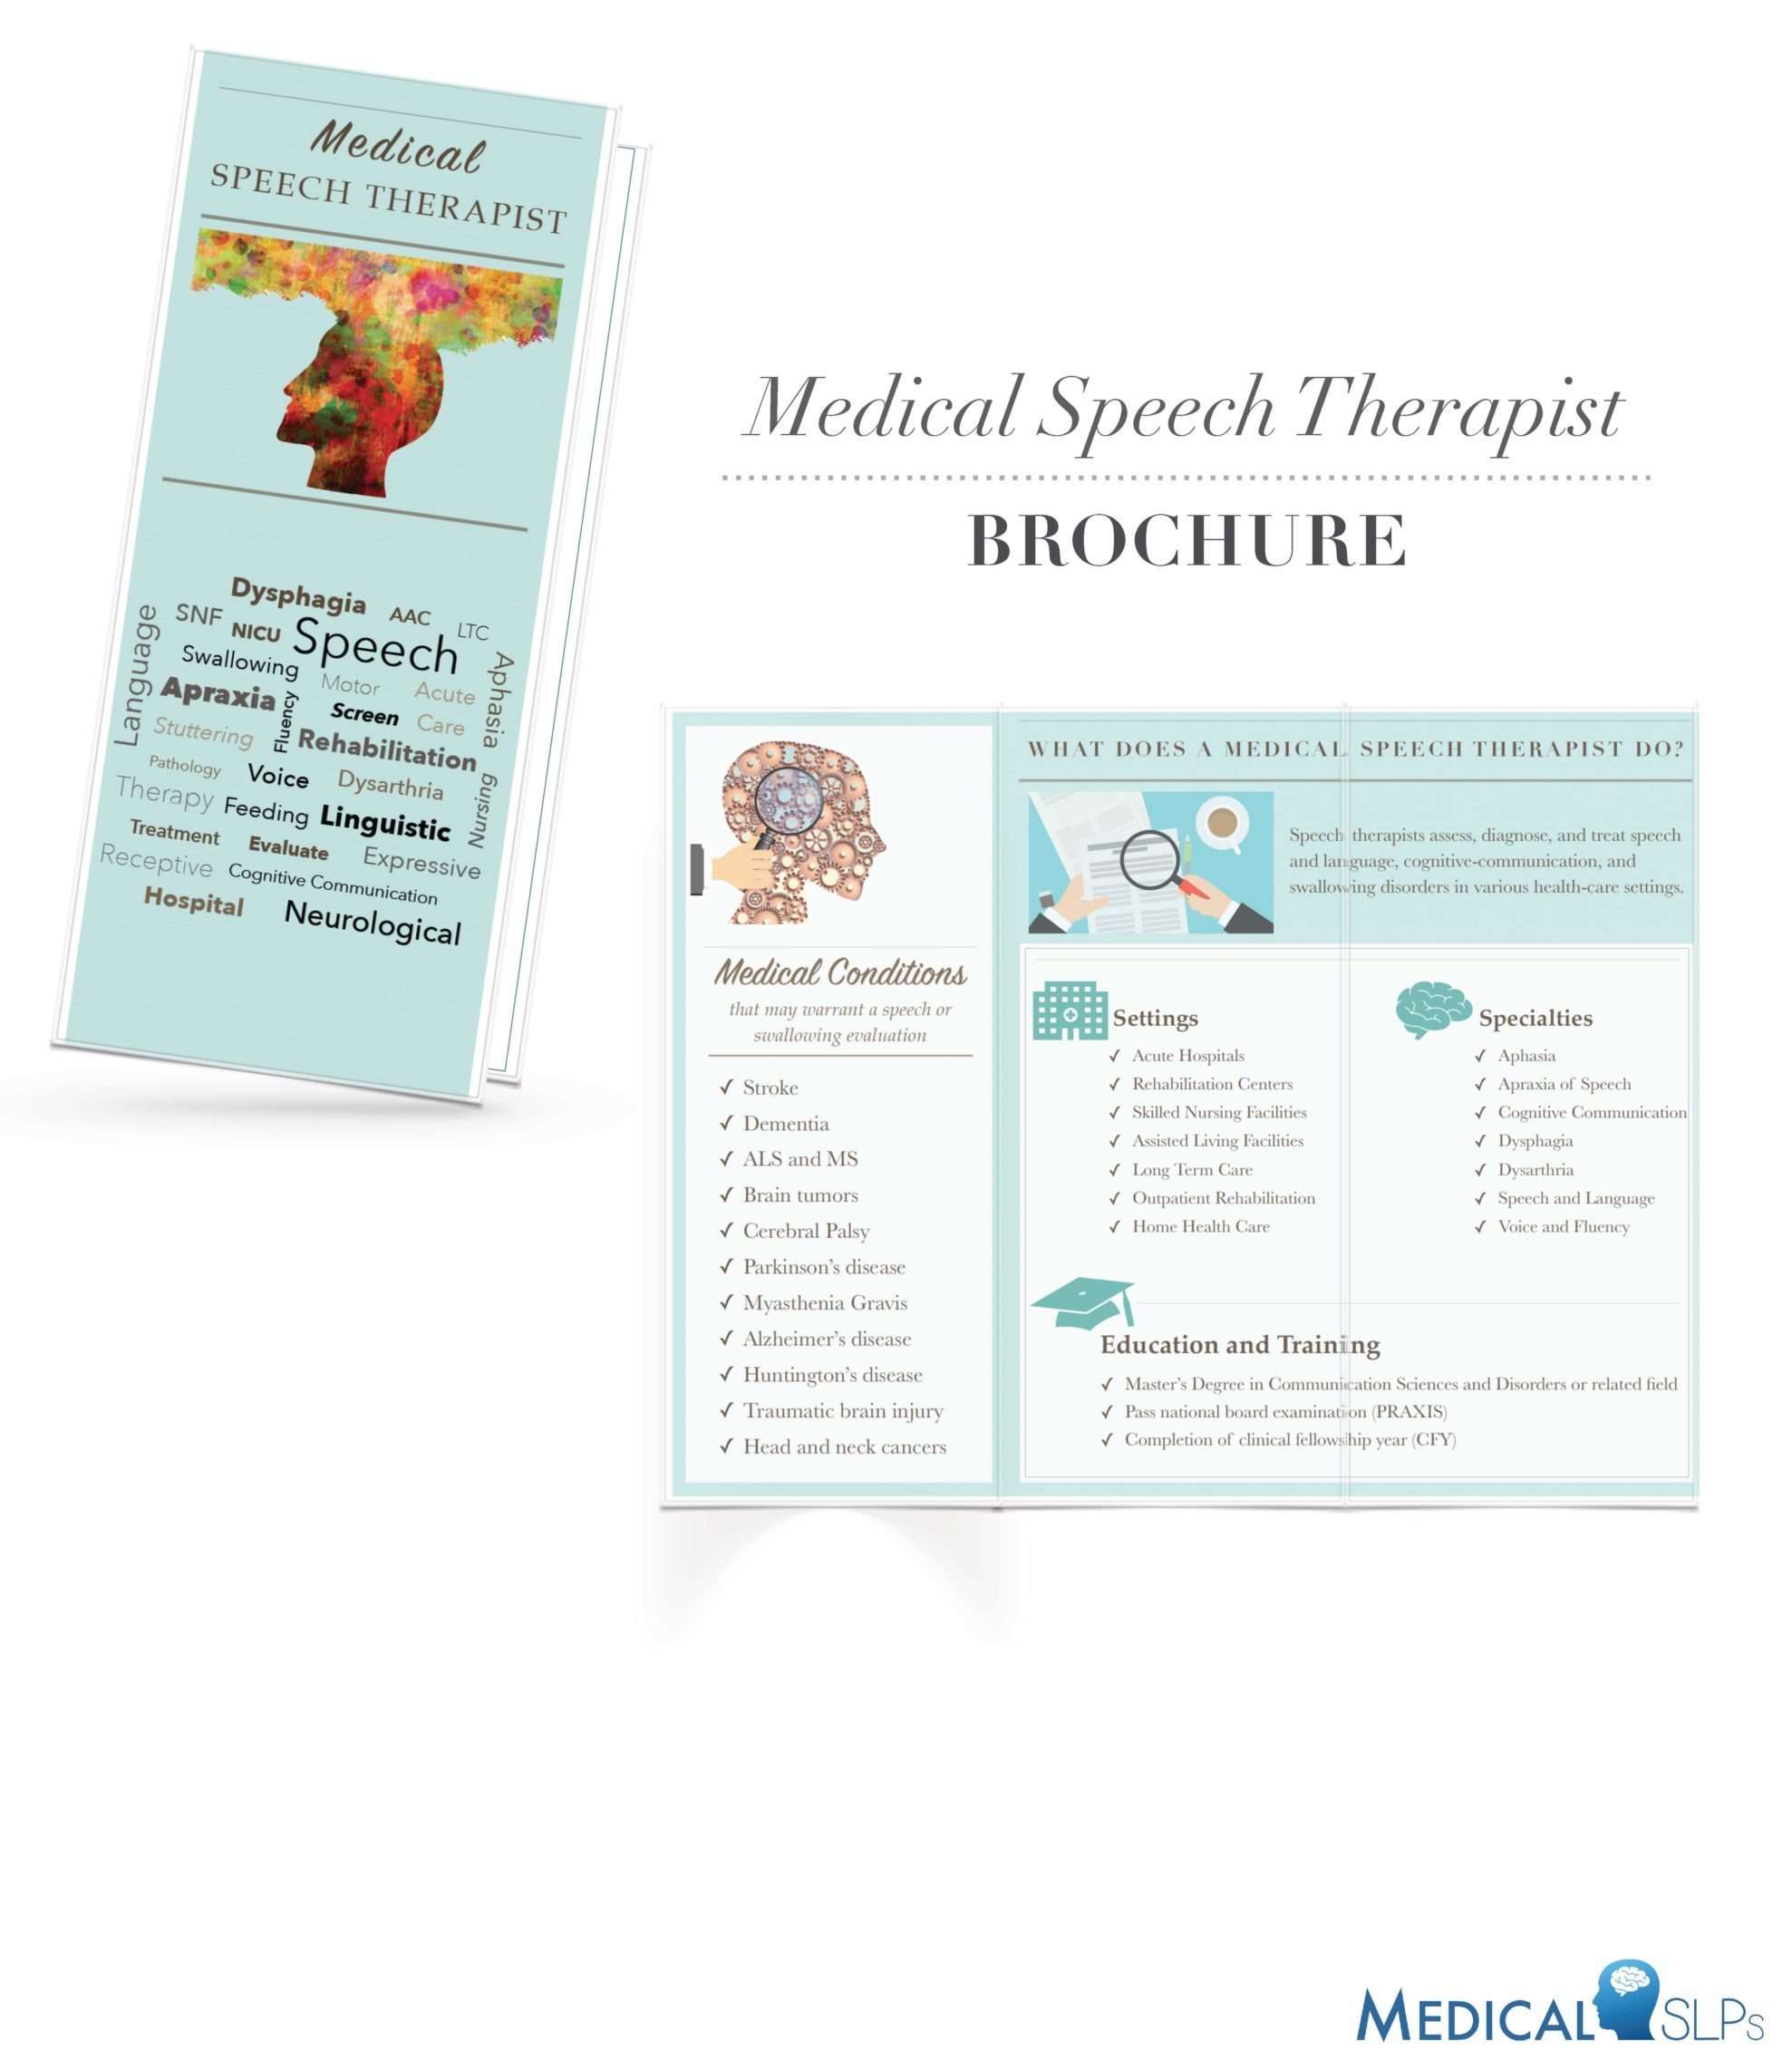 speech therapist meaning medical